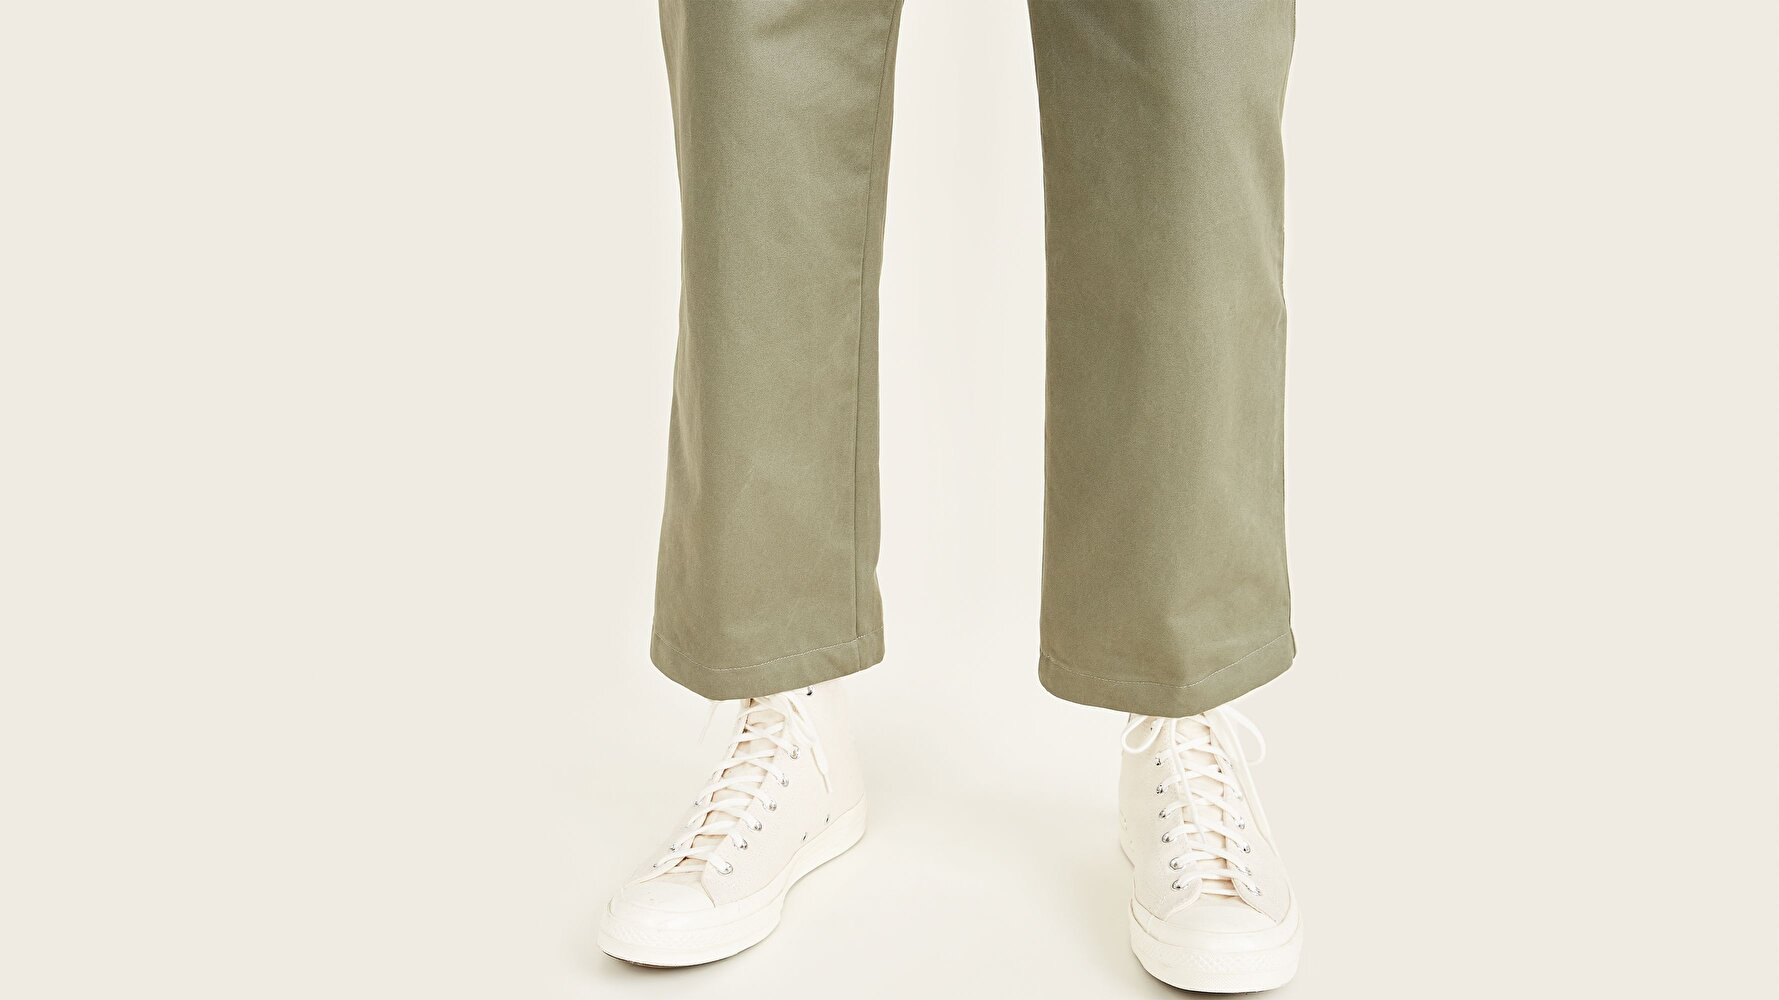 Cropped Pant, Straight Fit